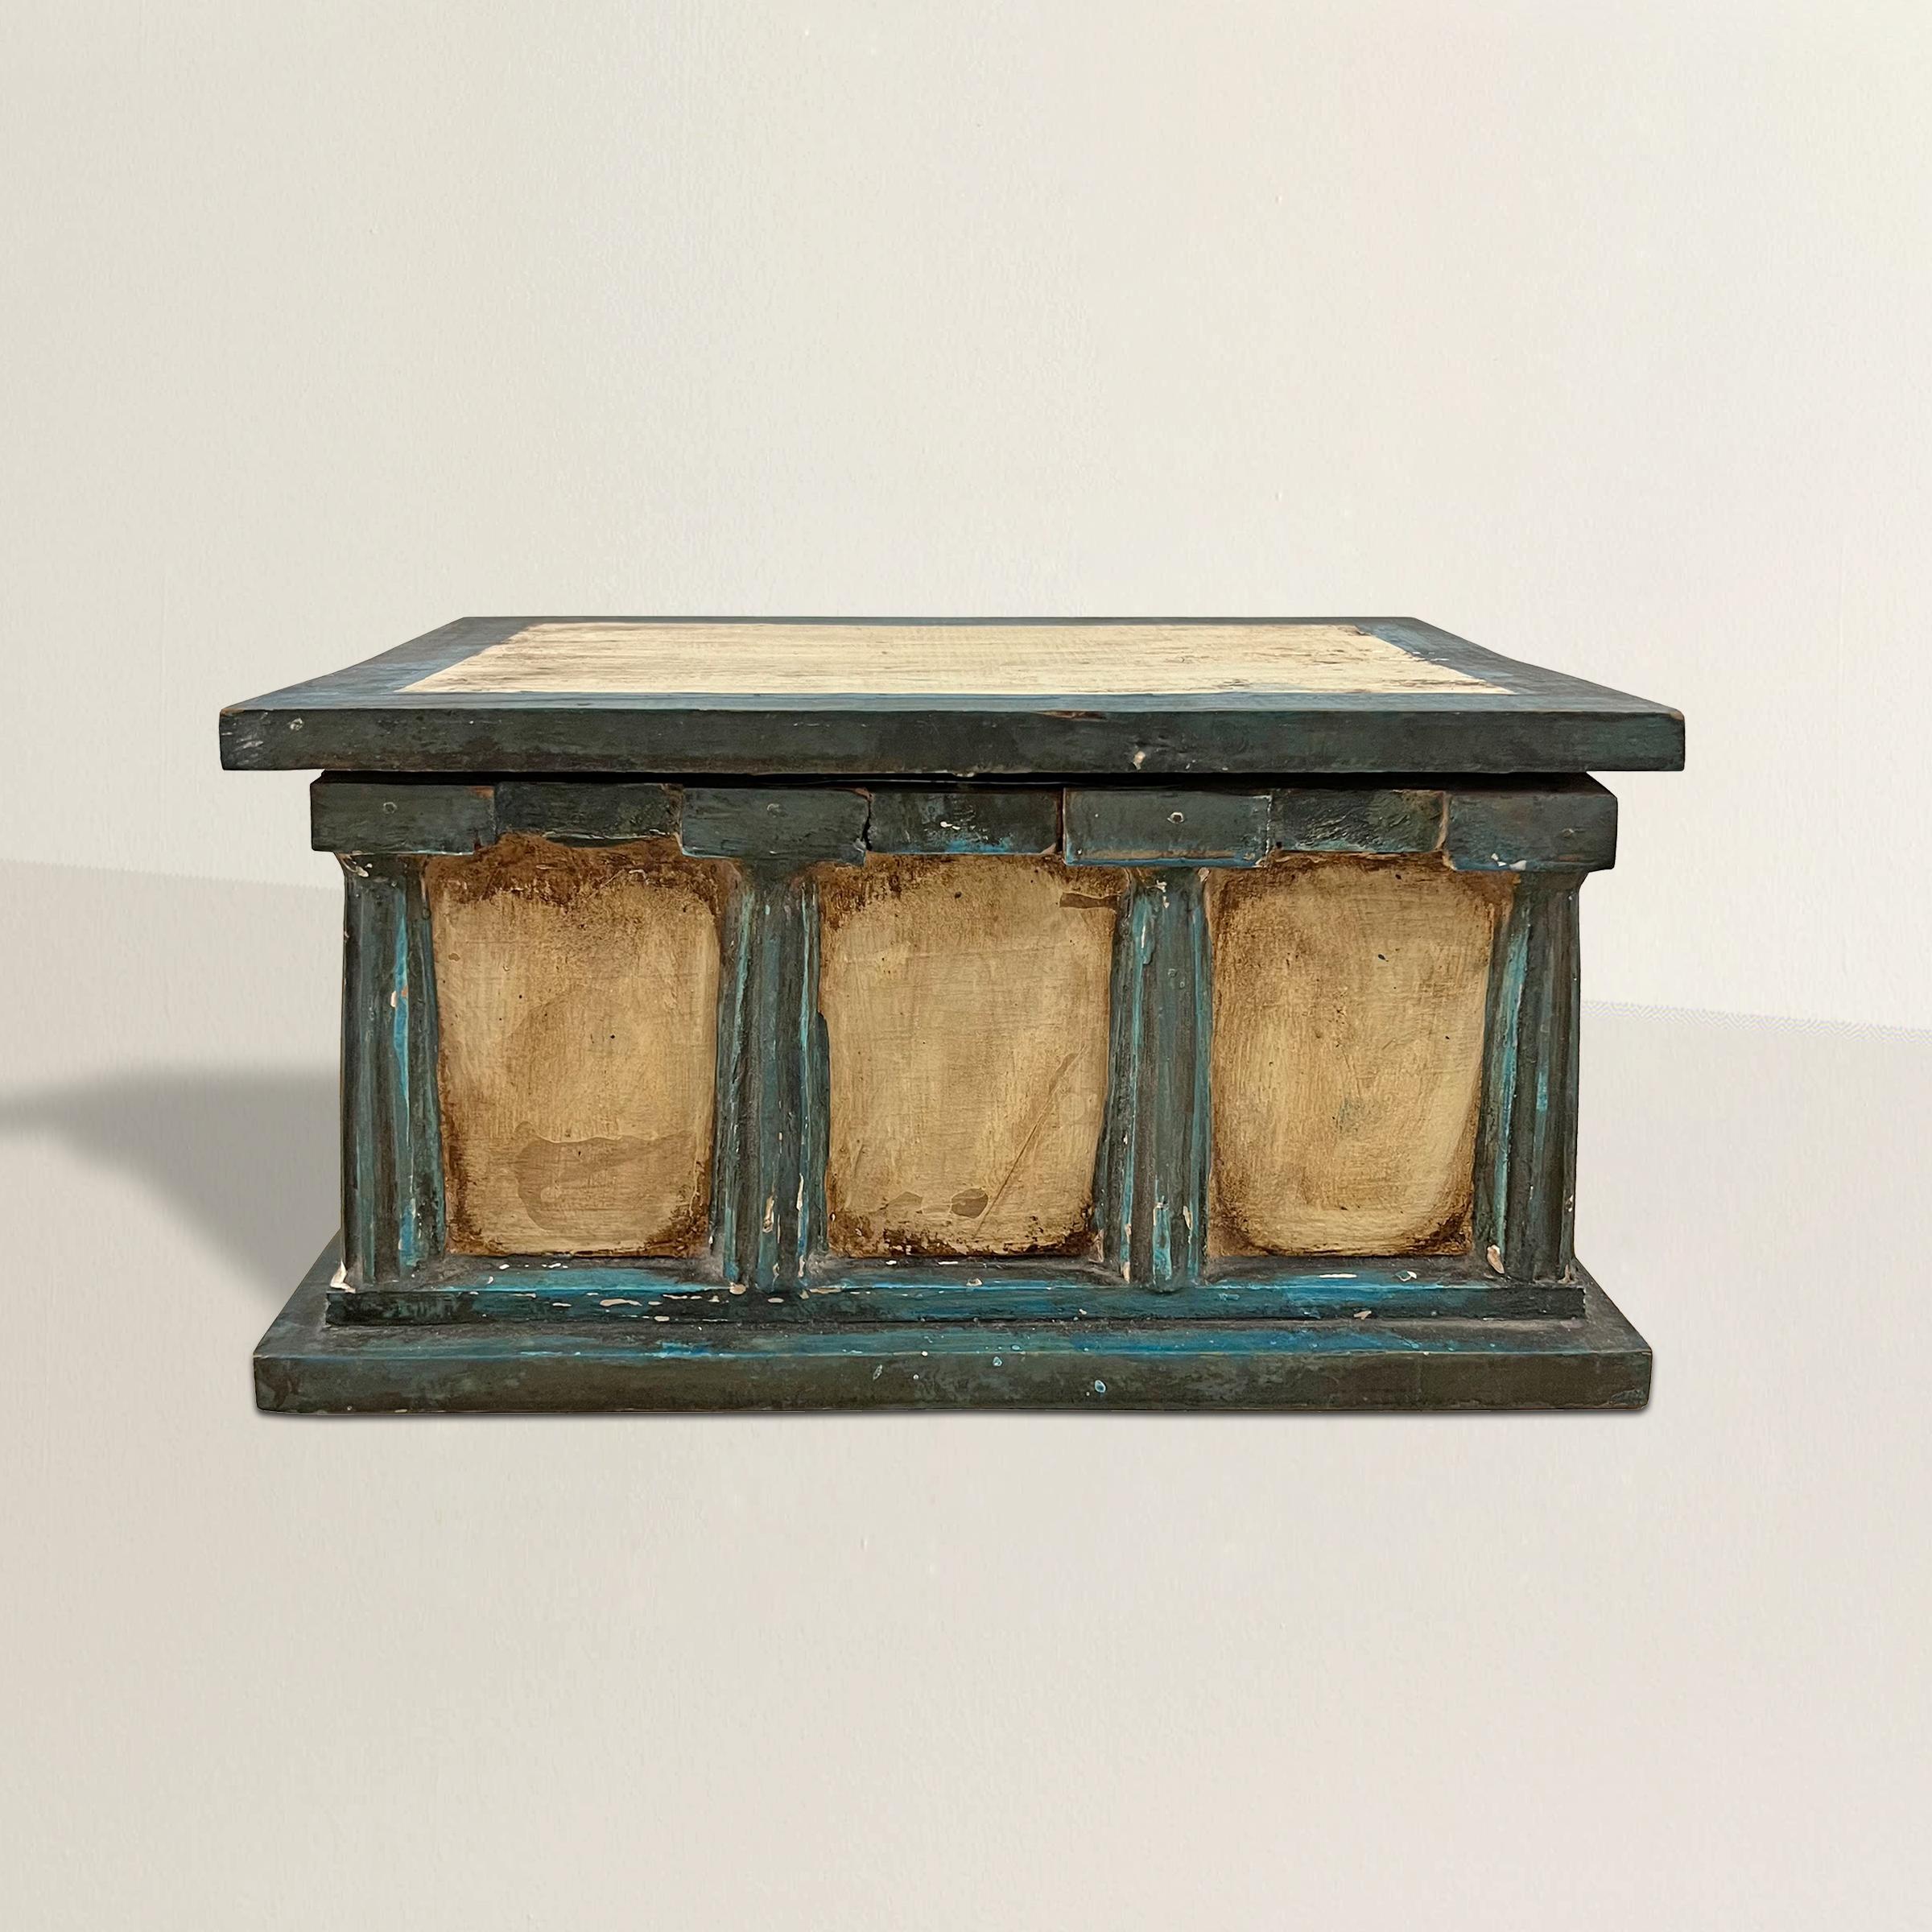 A fascinating and truly unique early 20th century American Folk Art box with the most wonderful Greek temple design with eight blue painted Doric columns around the perimeter and with a hinged lid.  Perfect on a bookshelf, coffee table, or hidden in